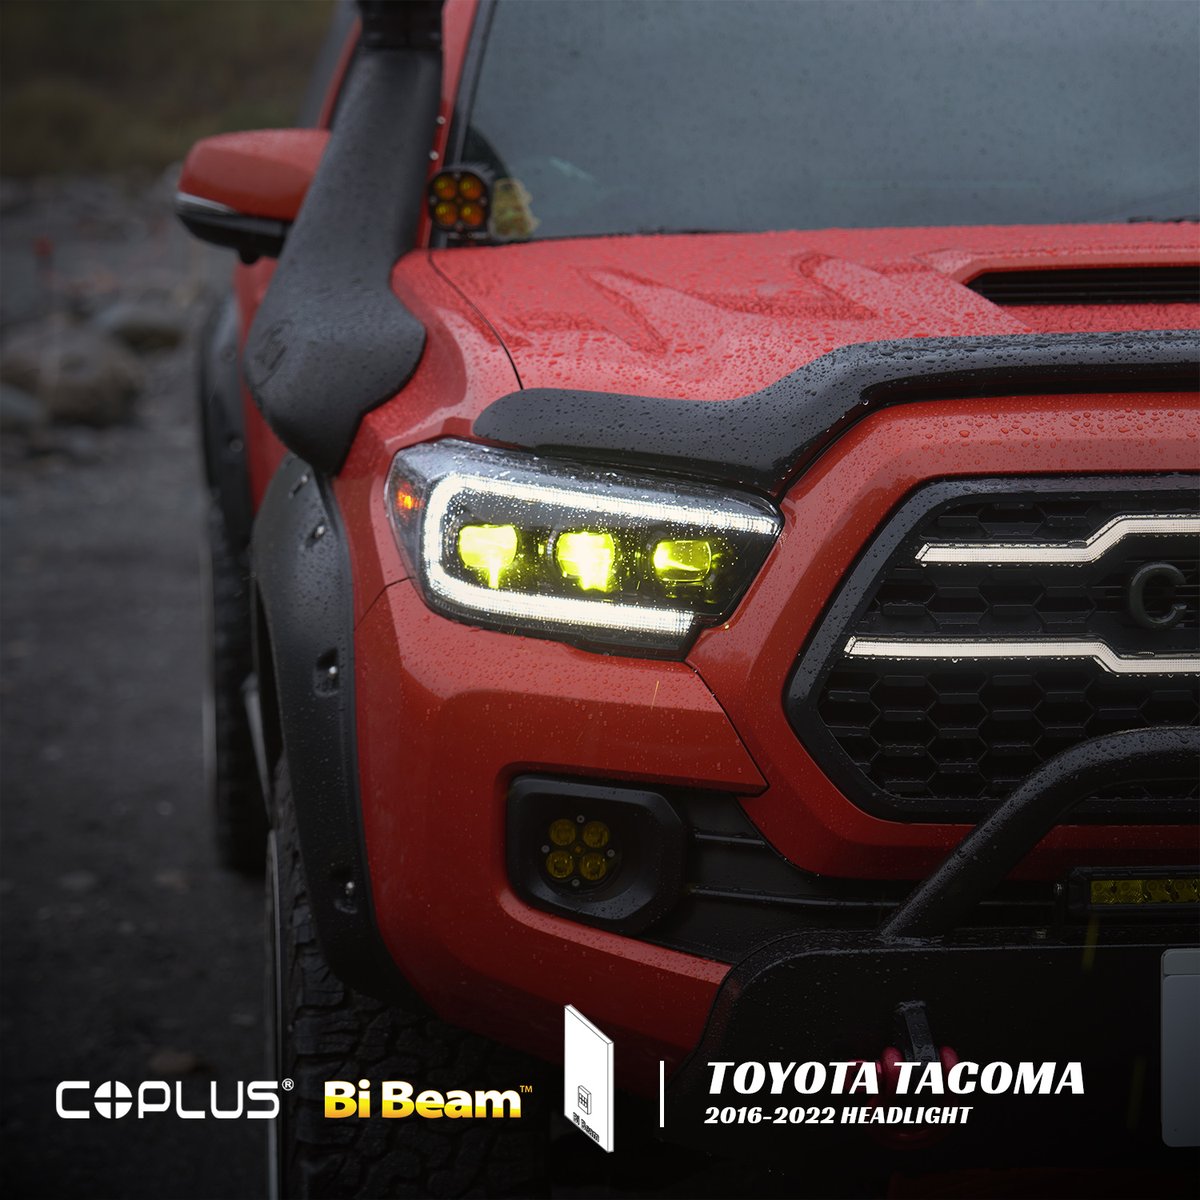 No need to worry about challenging weather conditions when you have COPLUS Bi-Beam headlights. With easy switching capabilities, you can confidently navigate through rain, snow, fog, or darkness. Let COPLUS keep your Tacoma evolving for the better! 

#toyota # #coplus